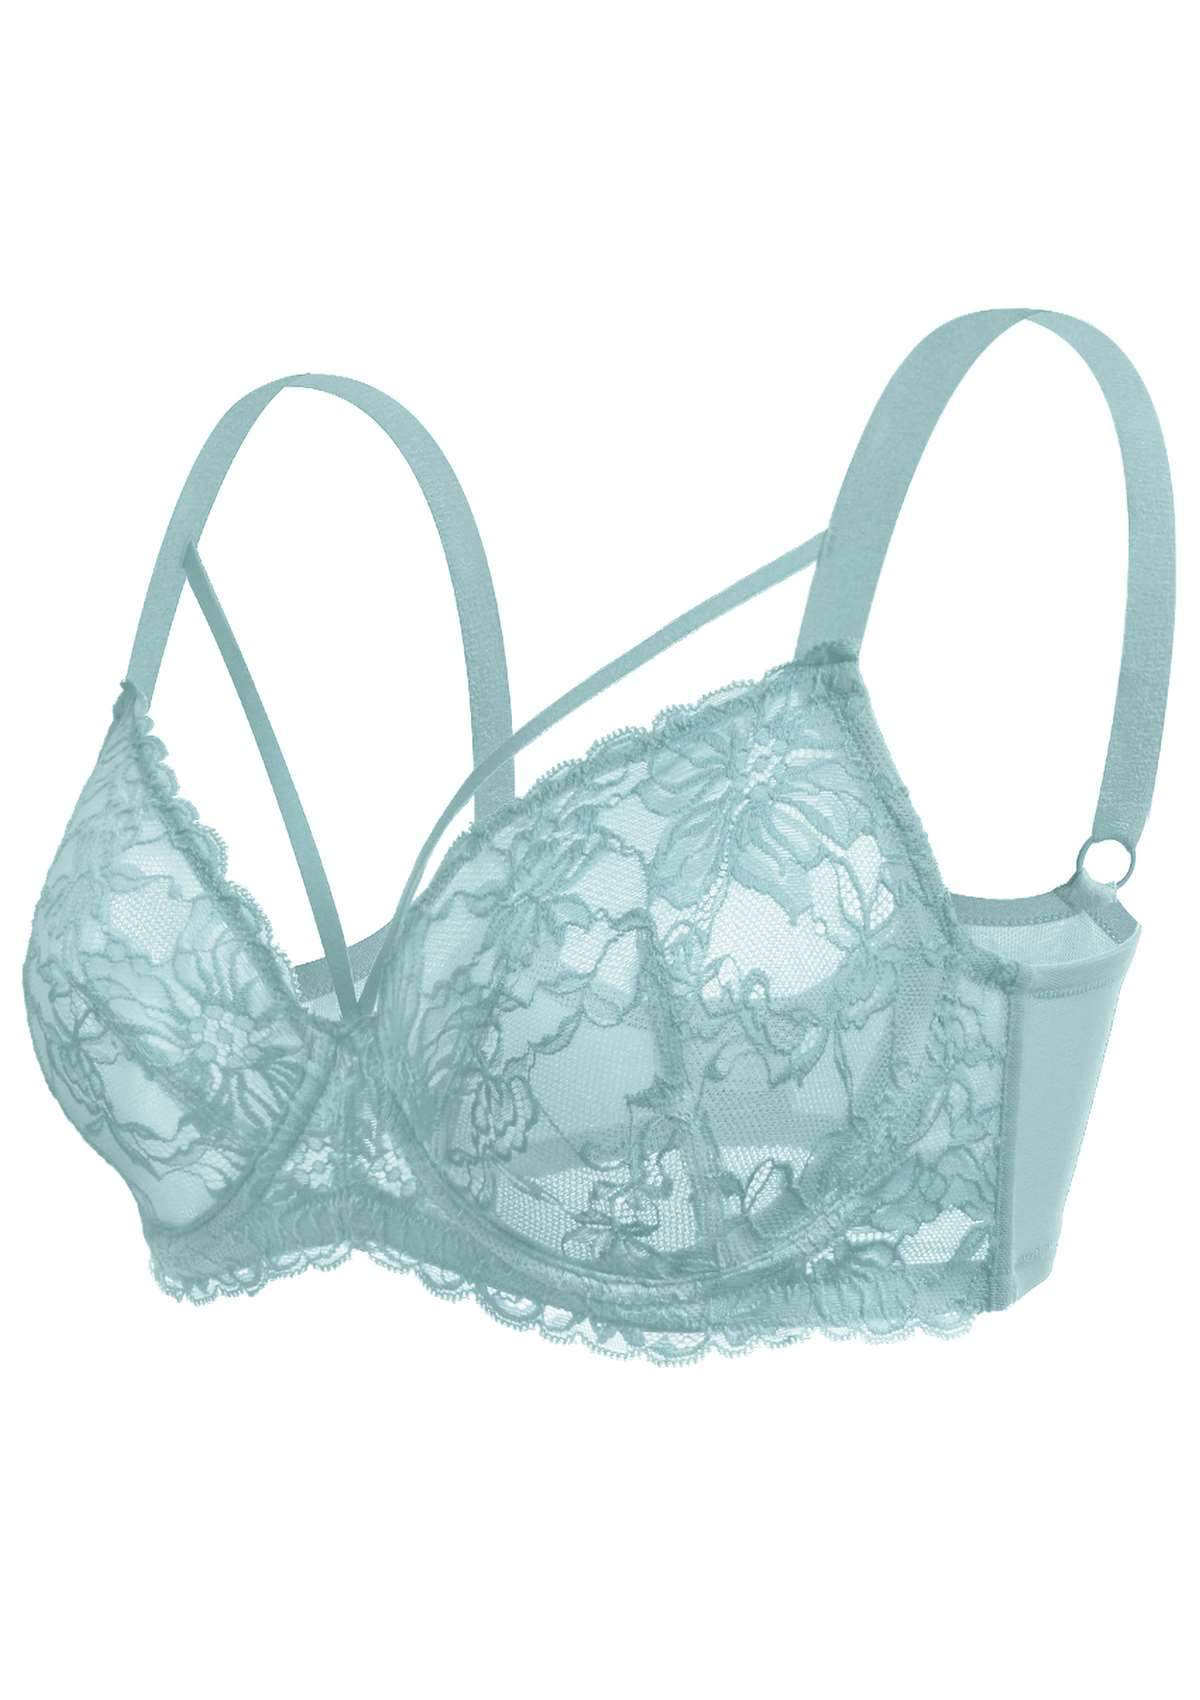 HSIA Pretty In Petals Unlined Lace Bra: Comfortable And Supportive Bra - Crystal Blue / 34 / D